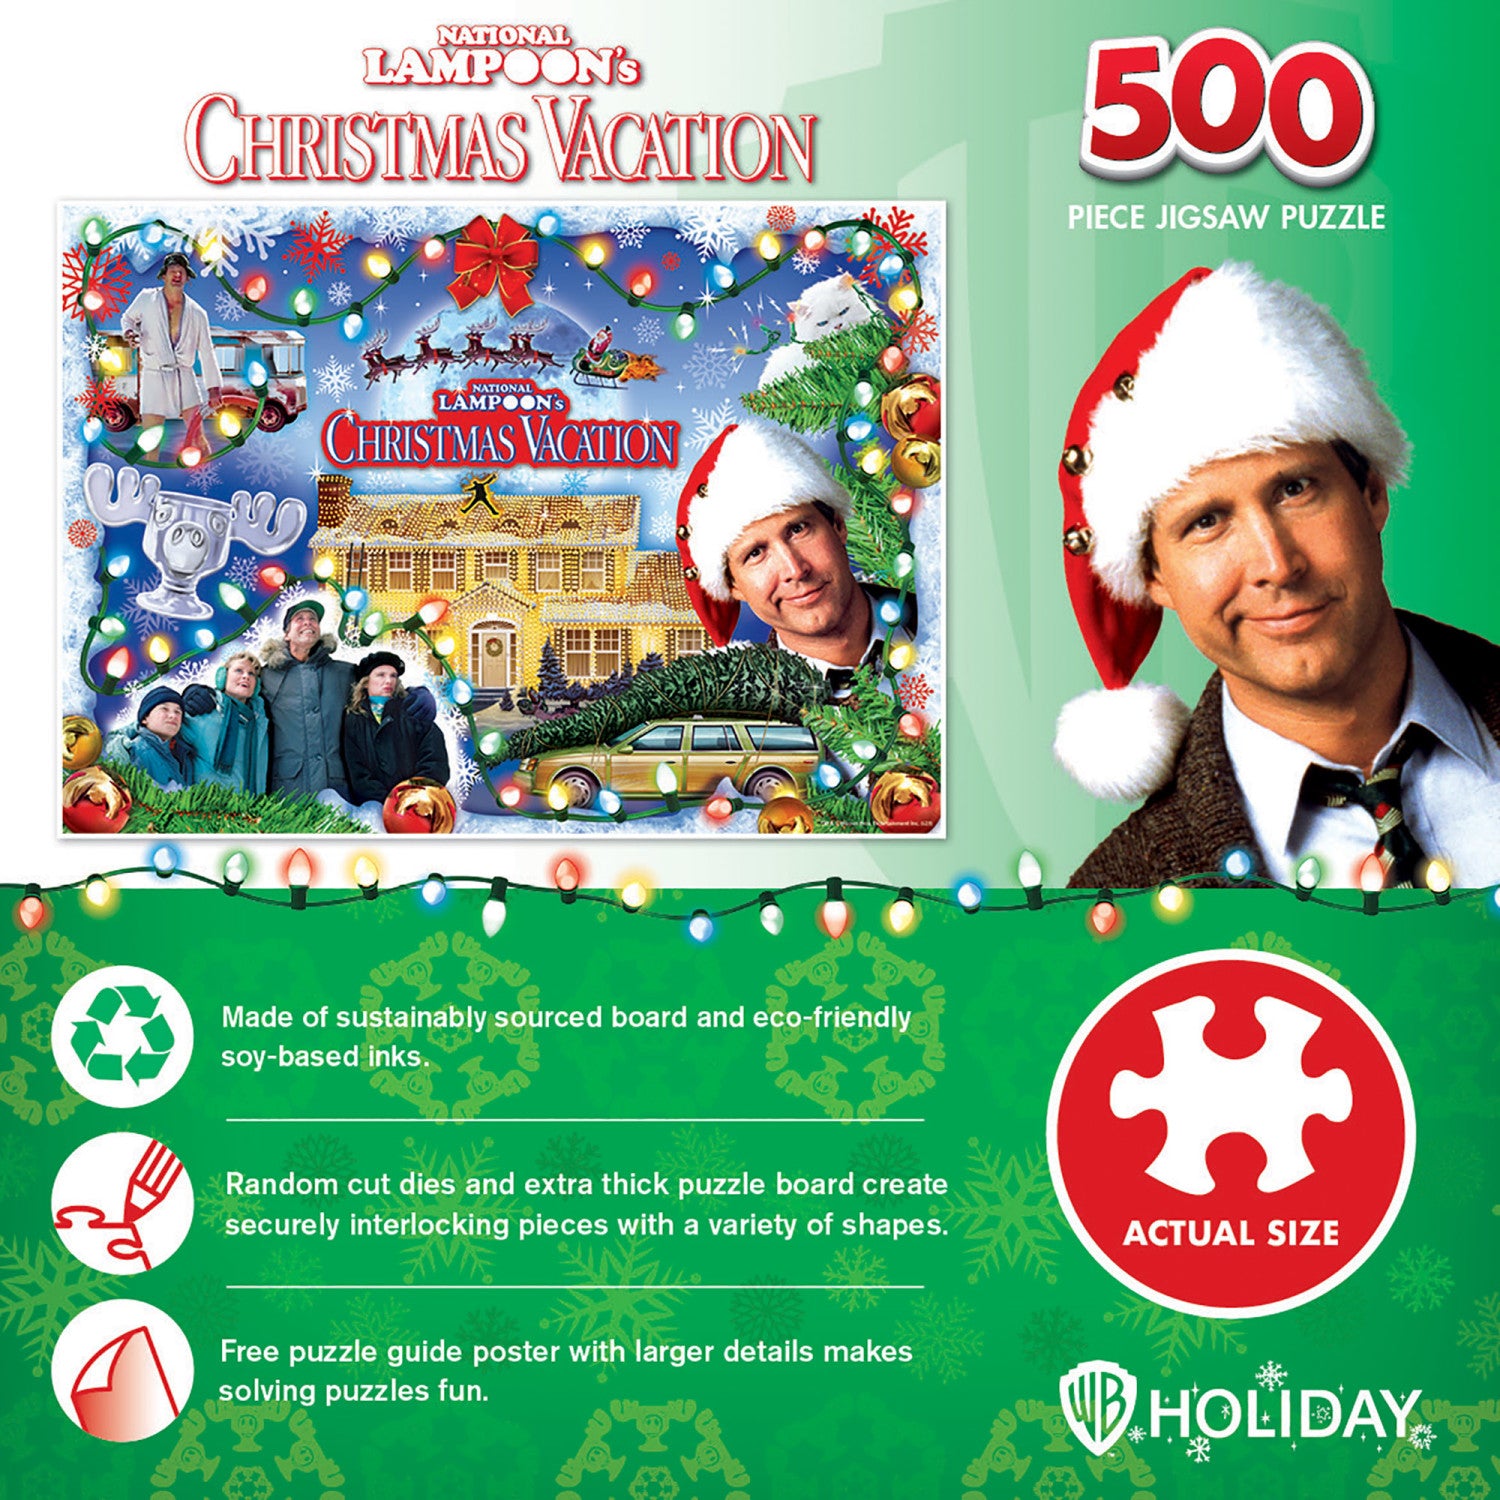 National Lampoon's Christmas Vacation - 500 Piece Jigsaw Puzzle